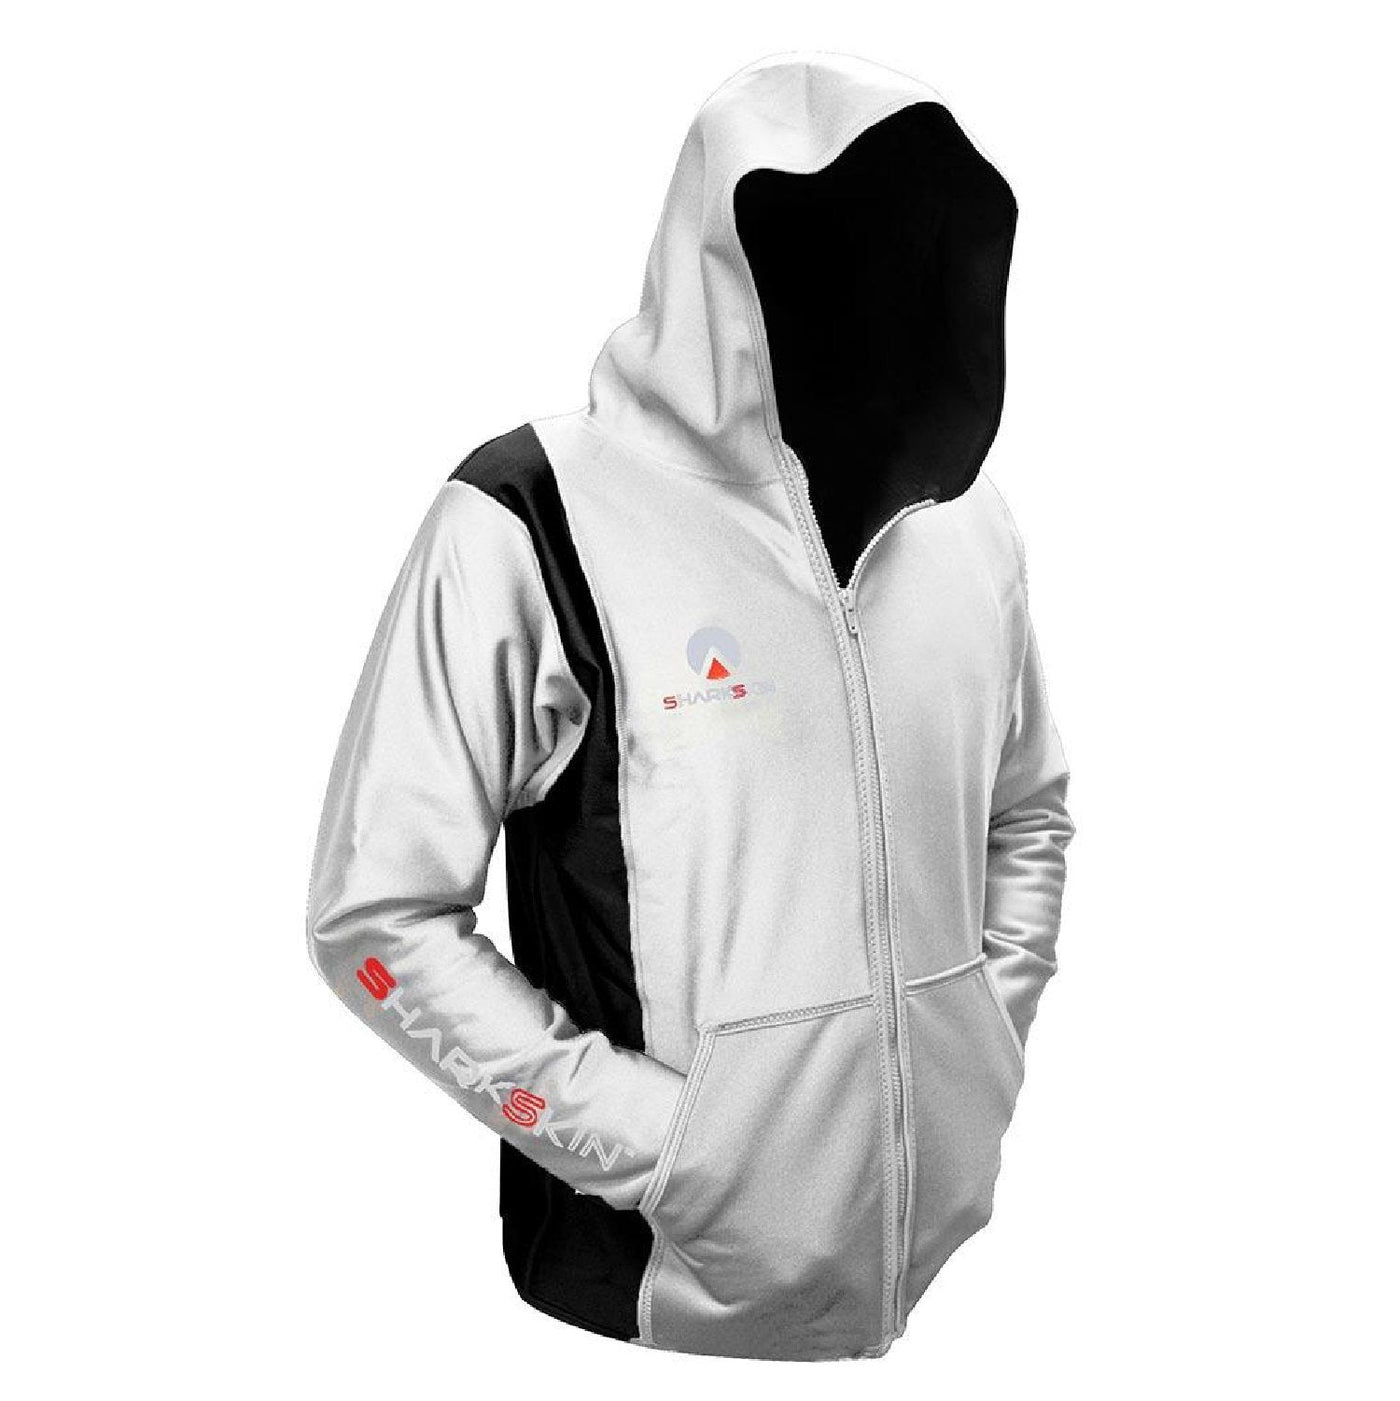 CHILLPROOF JACKET WITH HOOD - MENS (SECONDS)